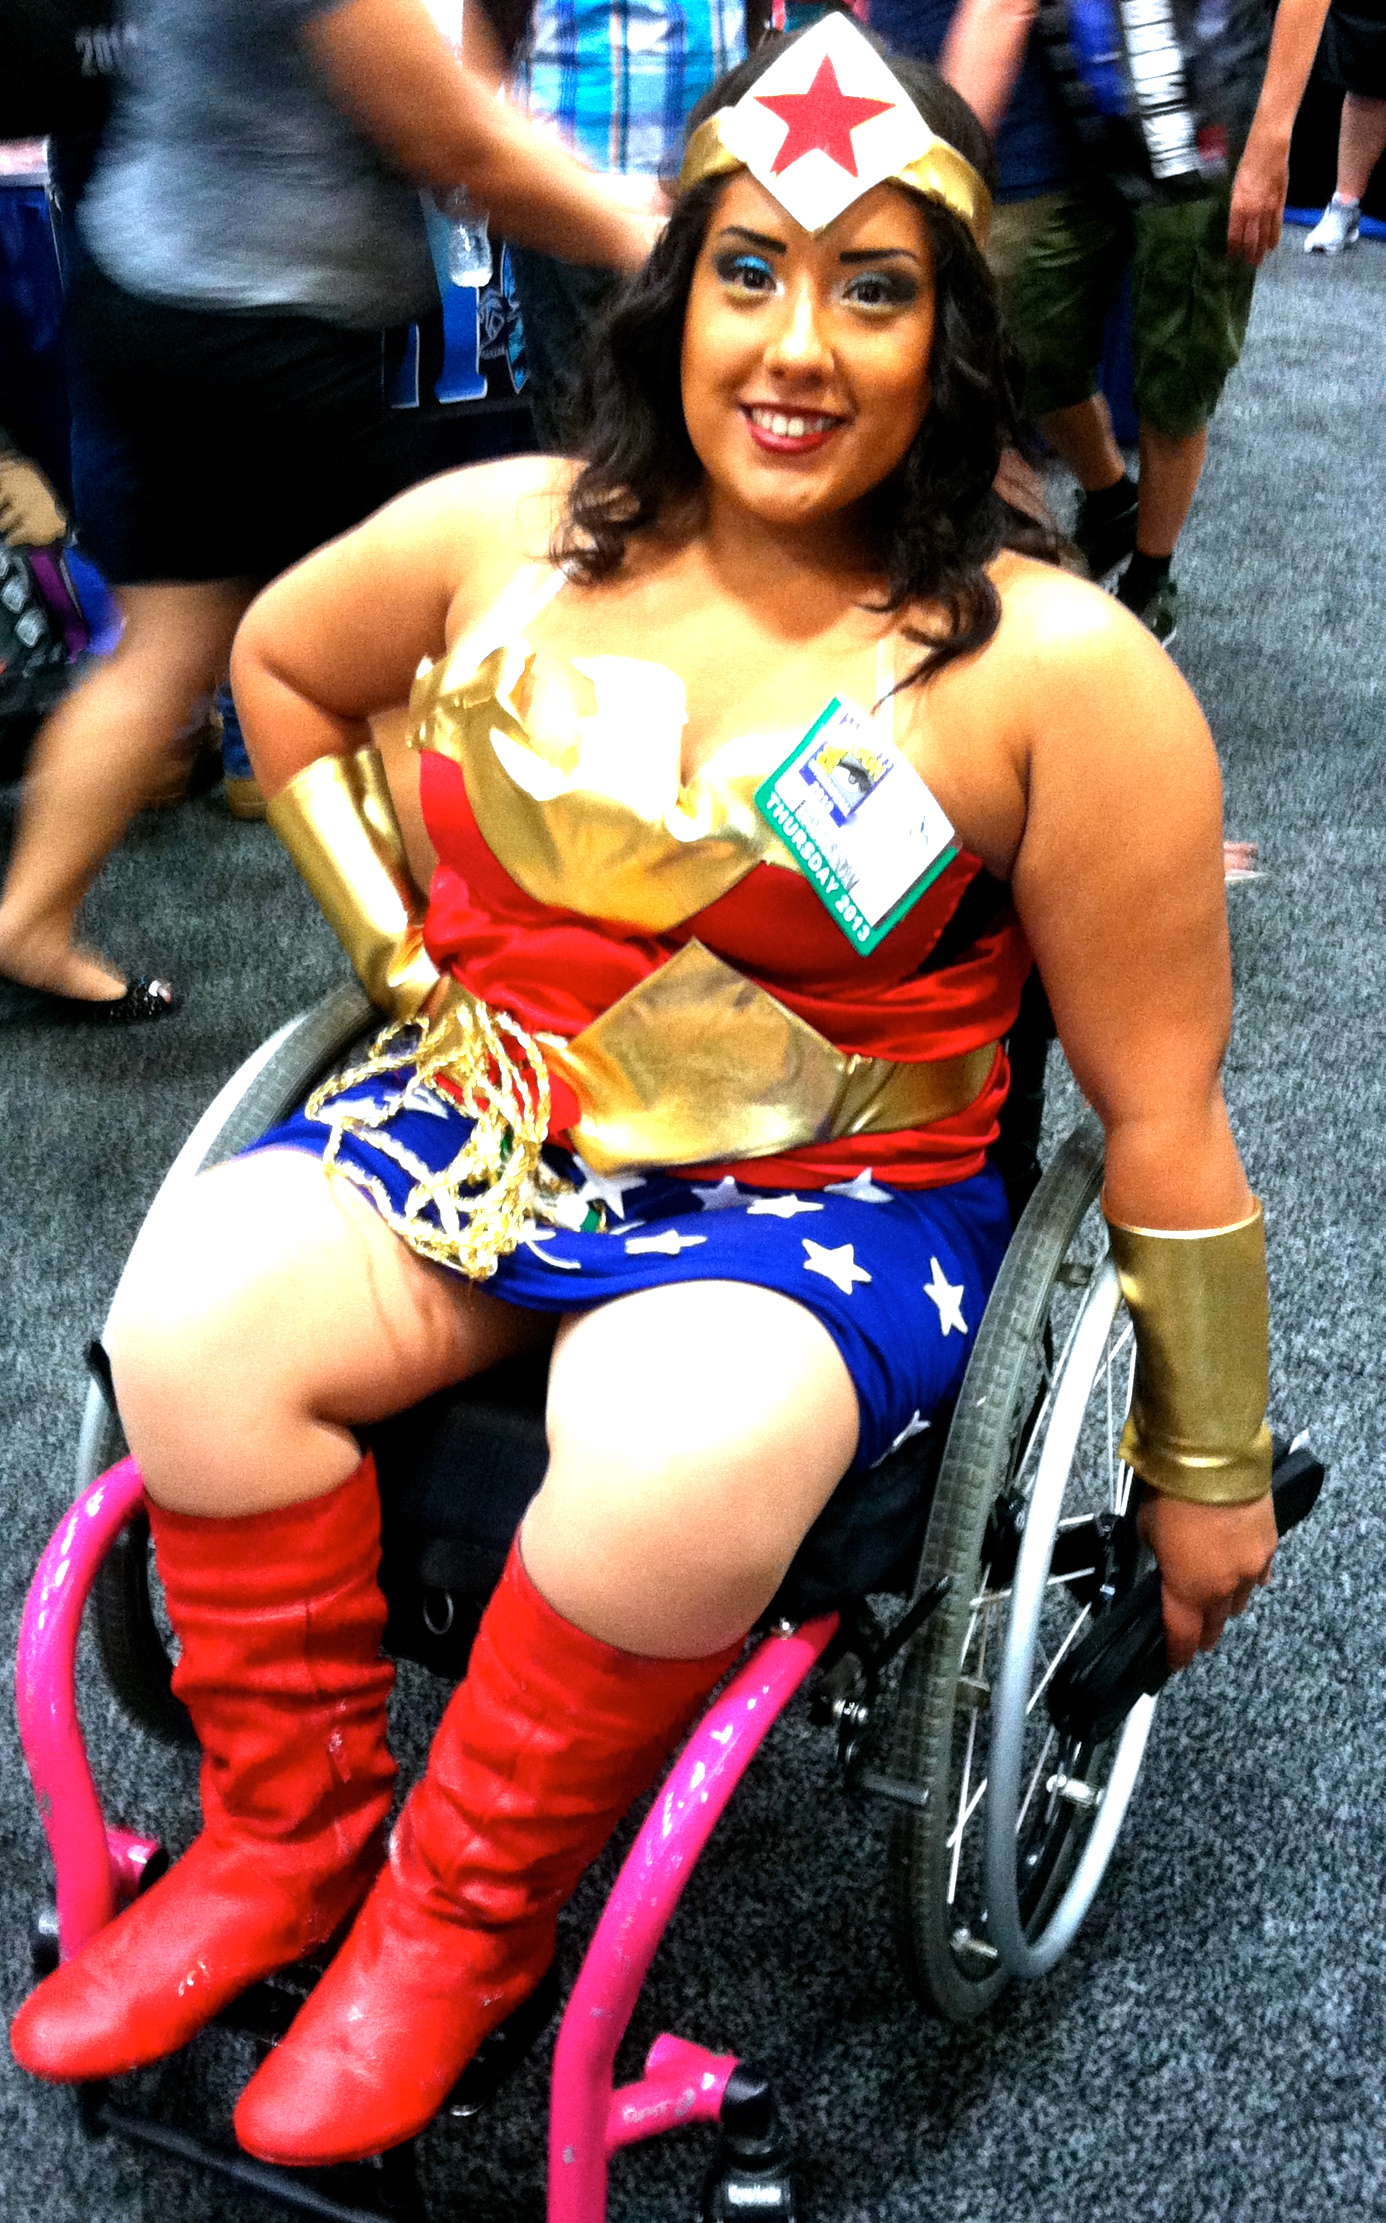 Wonder Woman Fat Porn - Cosplay for fat chicks - Hot porno